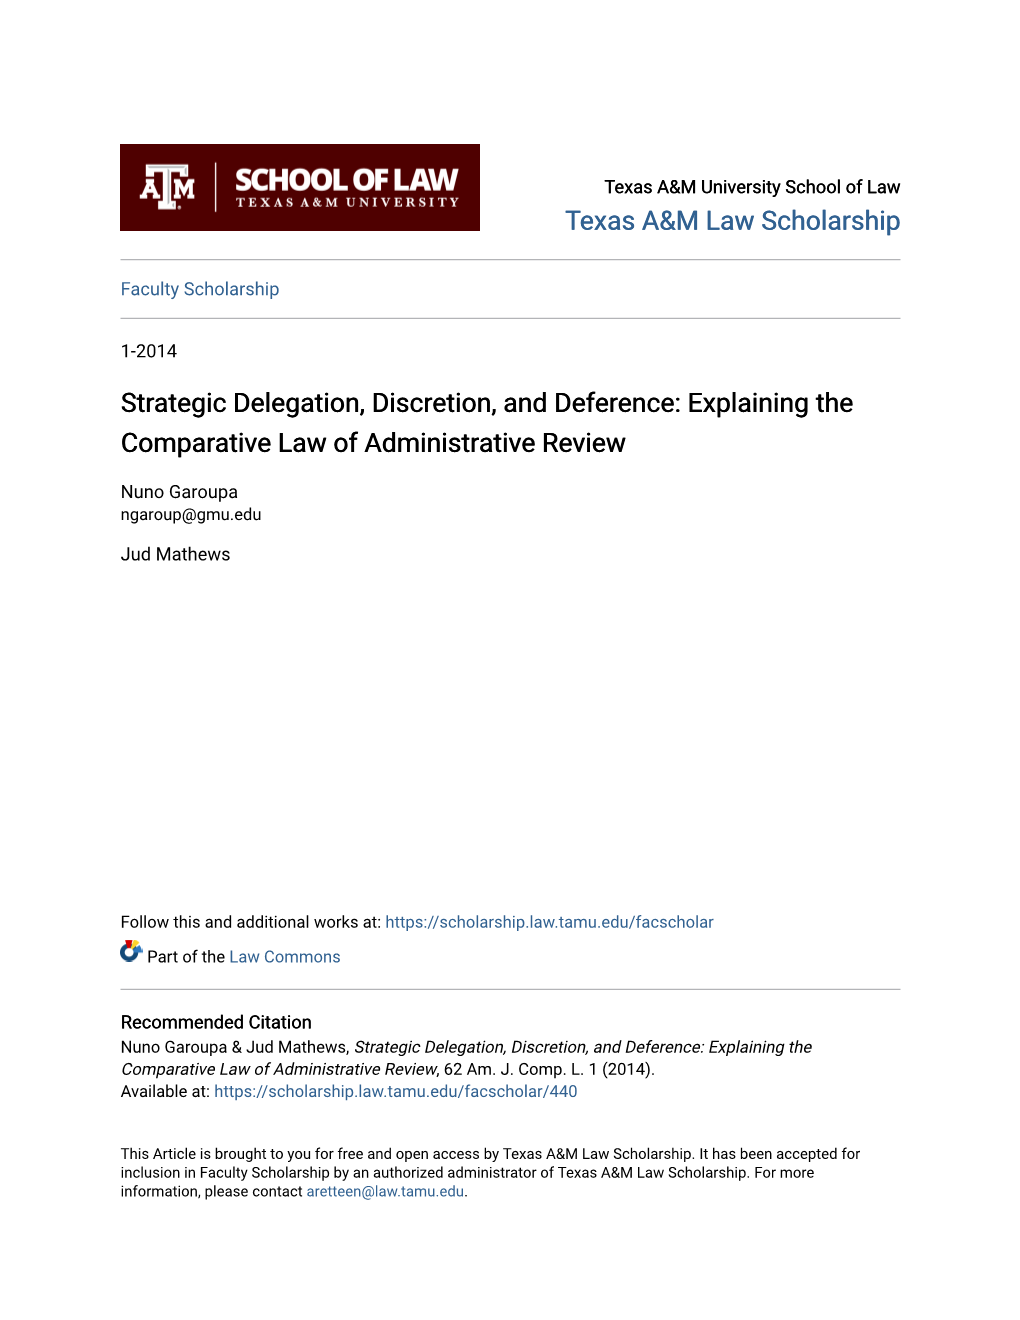 Strategic Delegation, Discretion, and Deference: Explaining the Comparative Law of Administrative Review